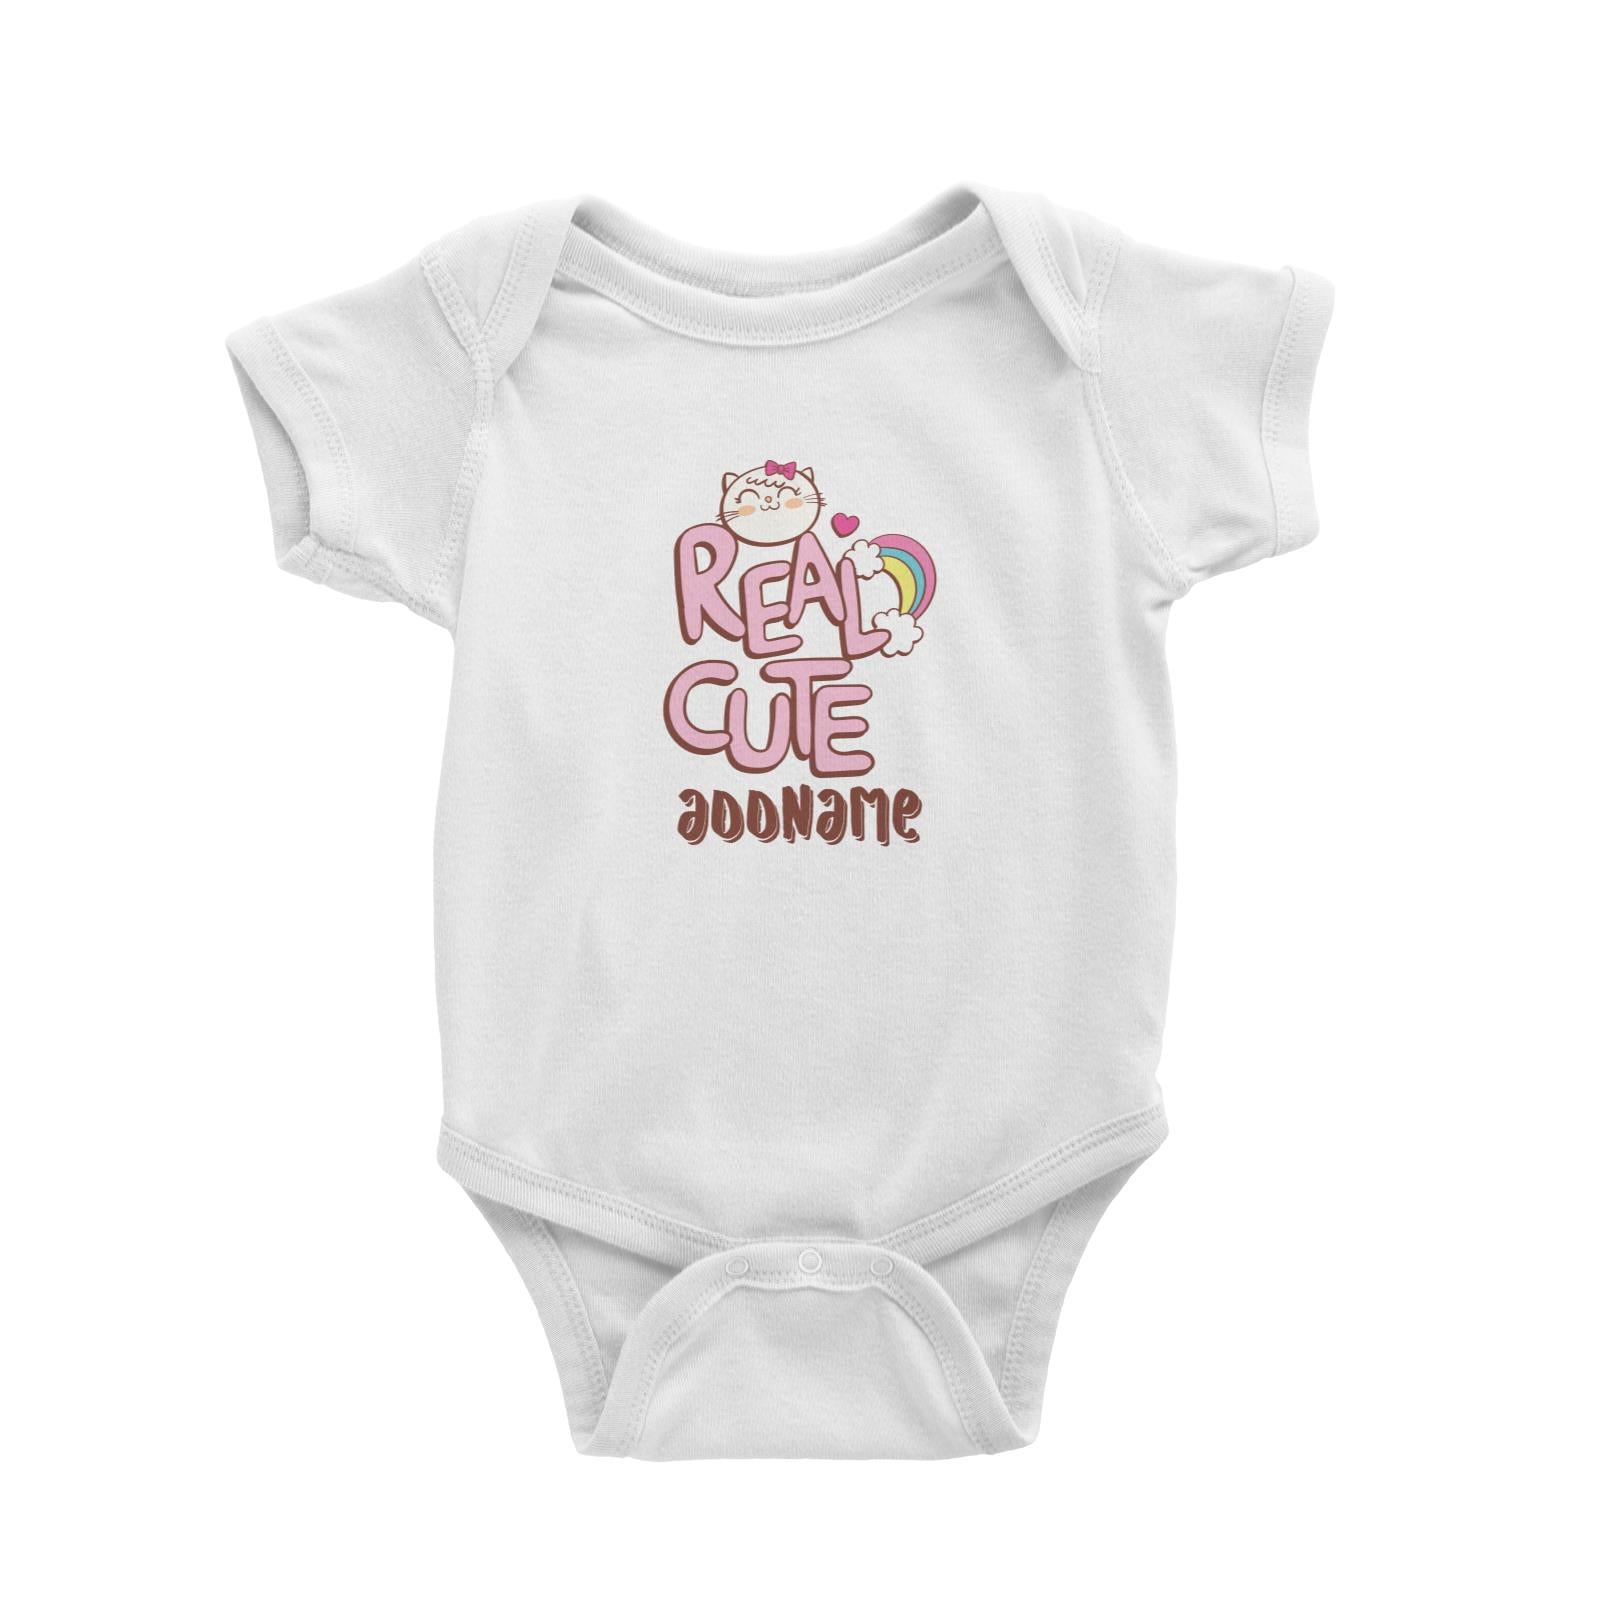 Cool Cute Animals Cats Real Cute Addname Baby Romper